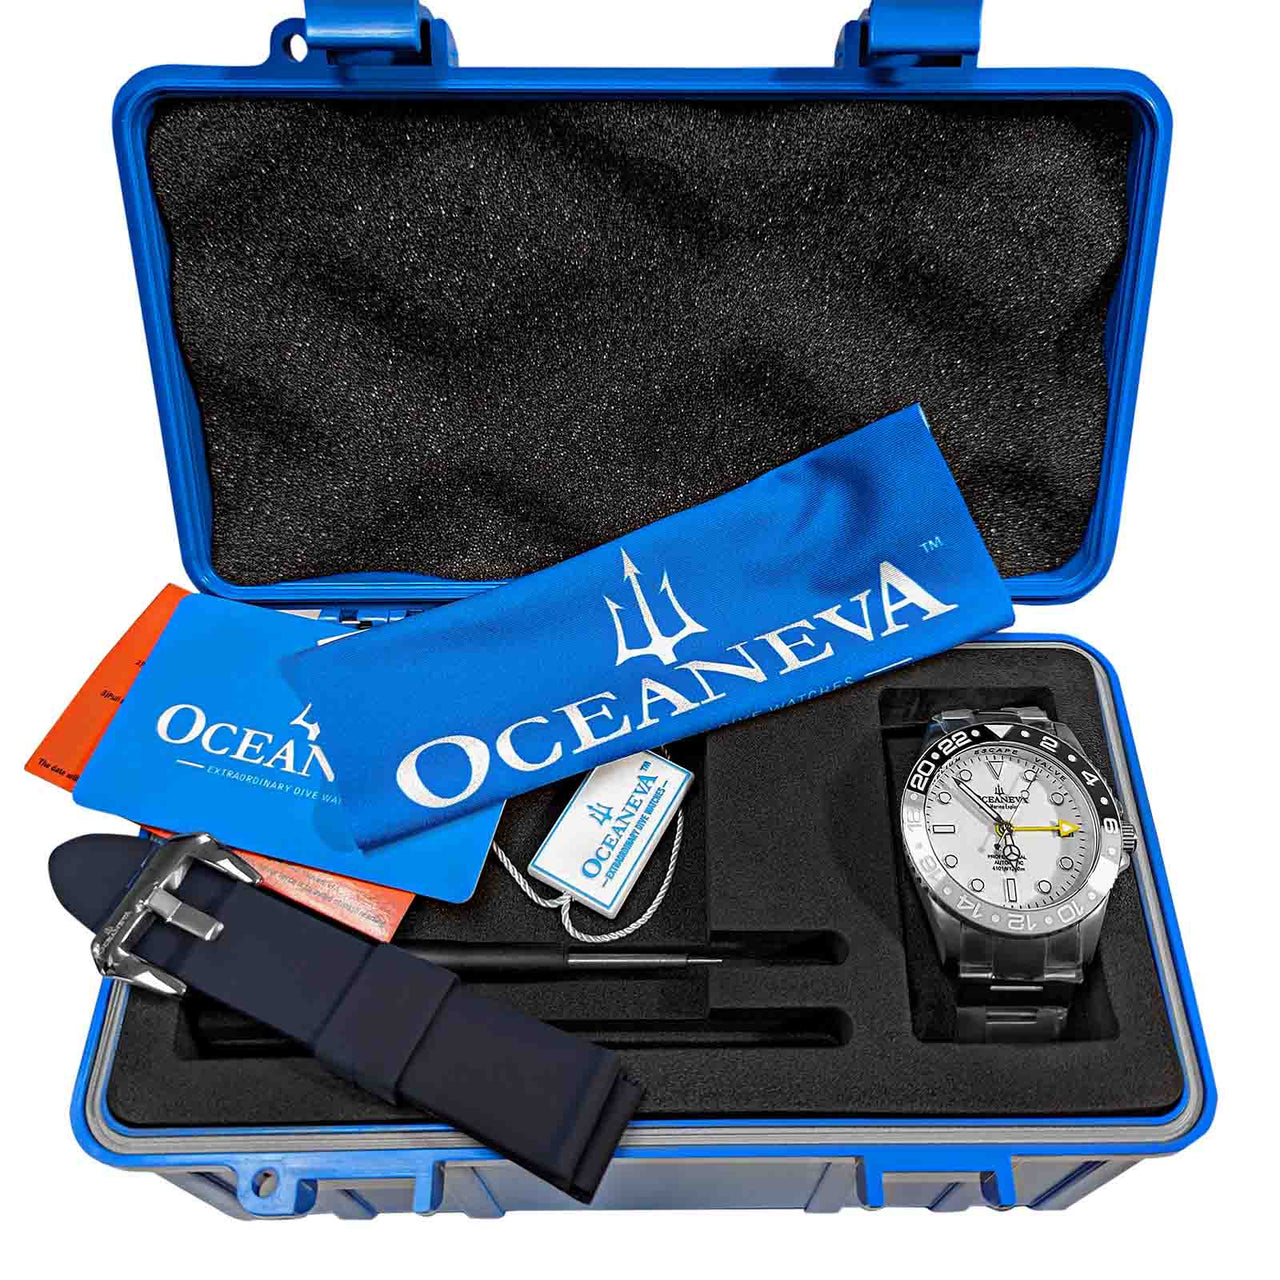 Oceaneva Titanium Watch compliant with airline ATA for travel readiness